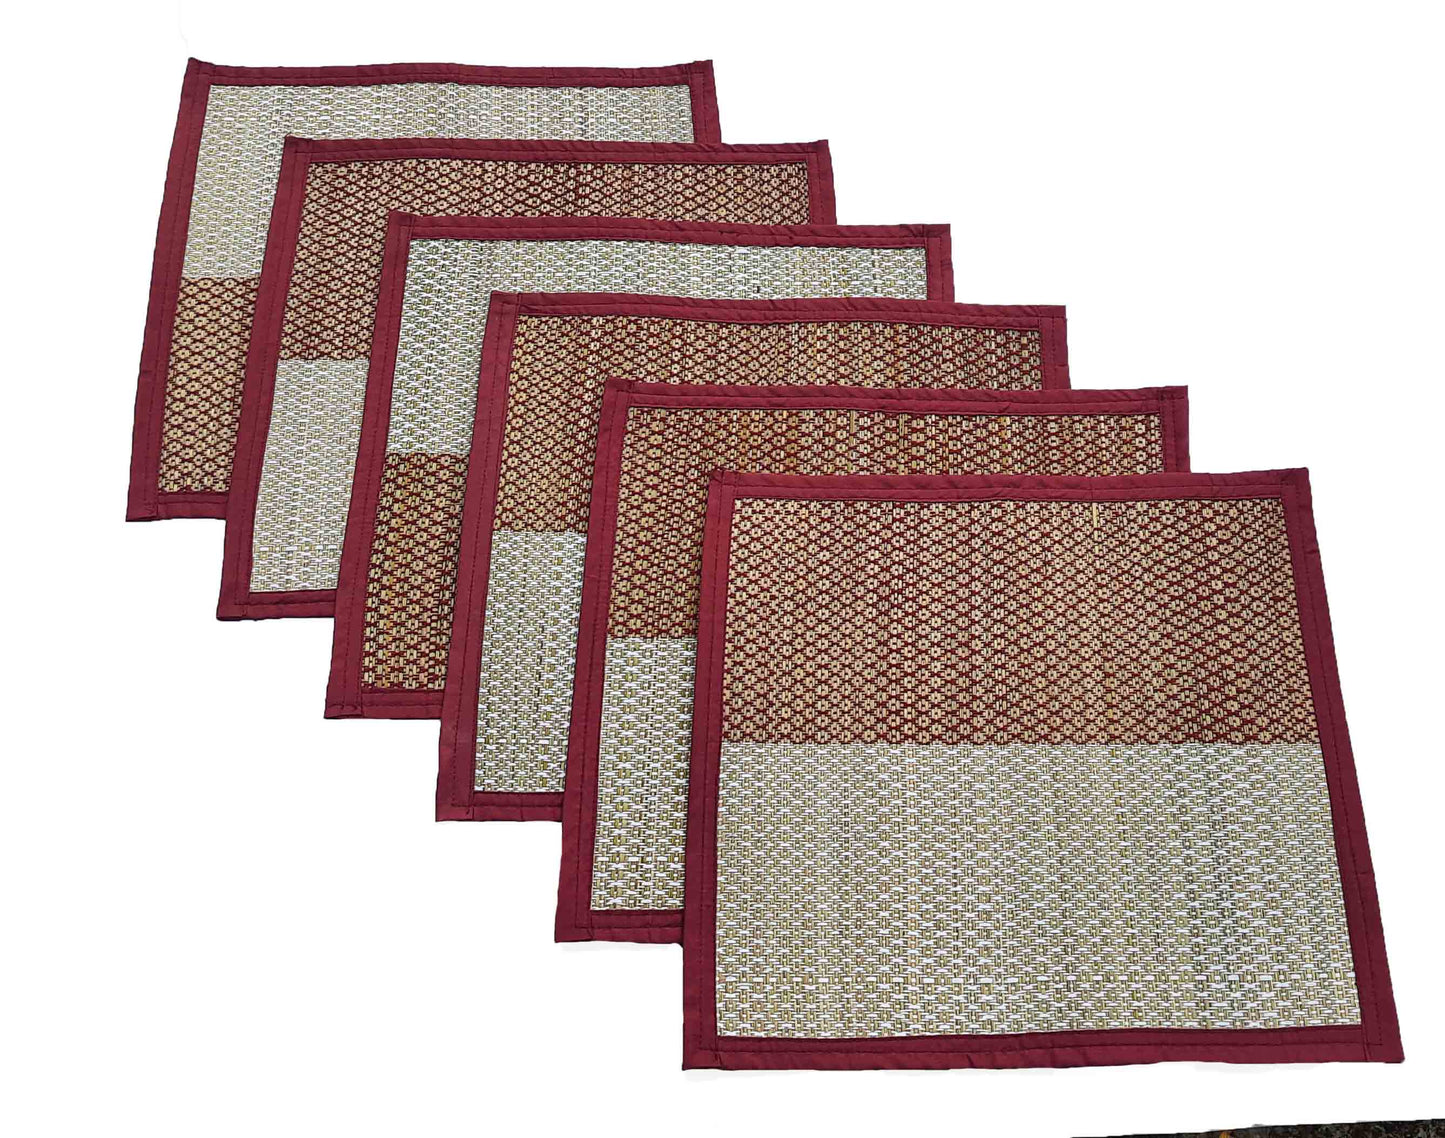 Pooja mat for sitting on floor Madurkathi grass made pooja aasan 18x18 inches  2 square shape holy alternative to Velvet puja aasan T3-09